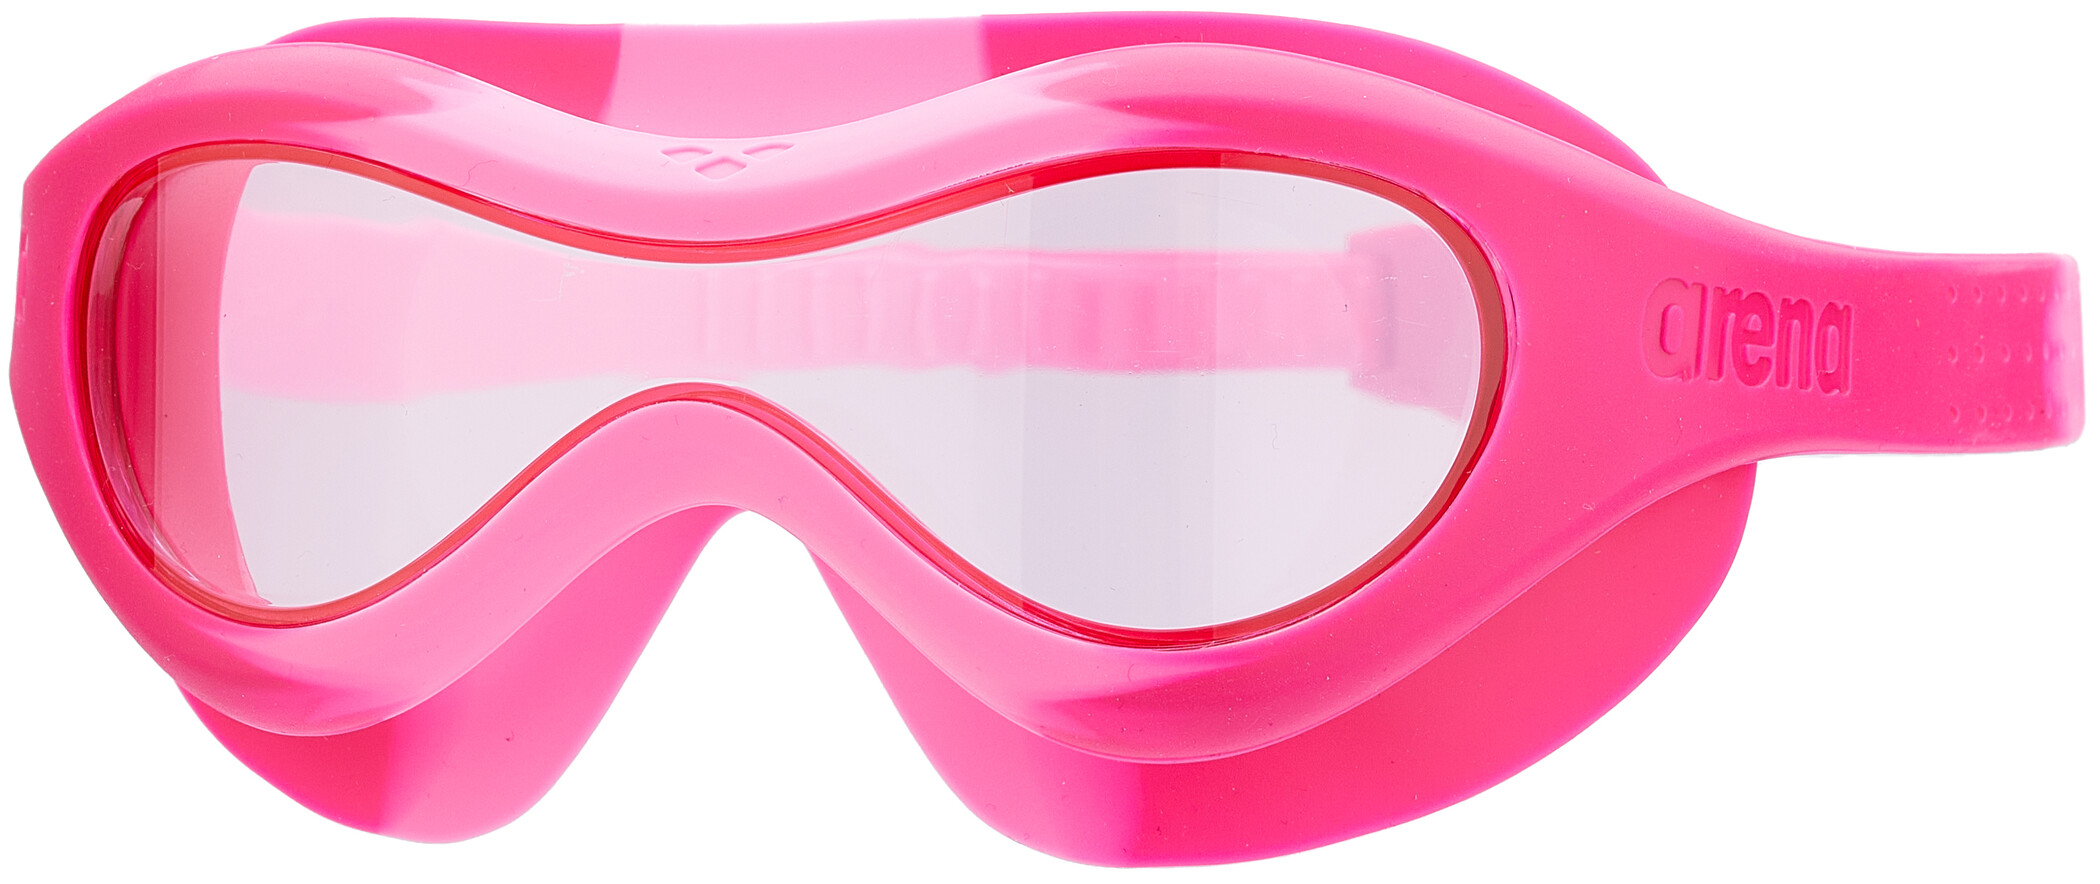 IMPLEO Swim Goggles Swimming No Leaking Anti-Fog Swim Sports Includes Protective Case for Adults and Youth UV Protection Blue 